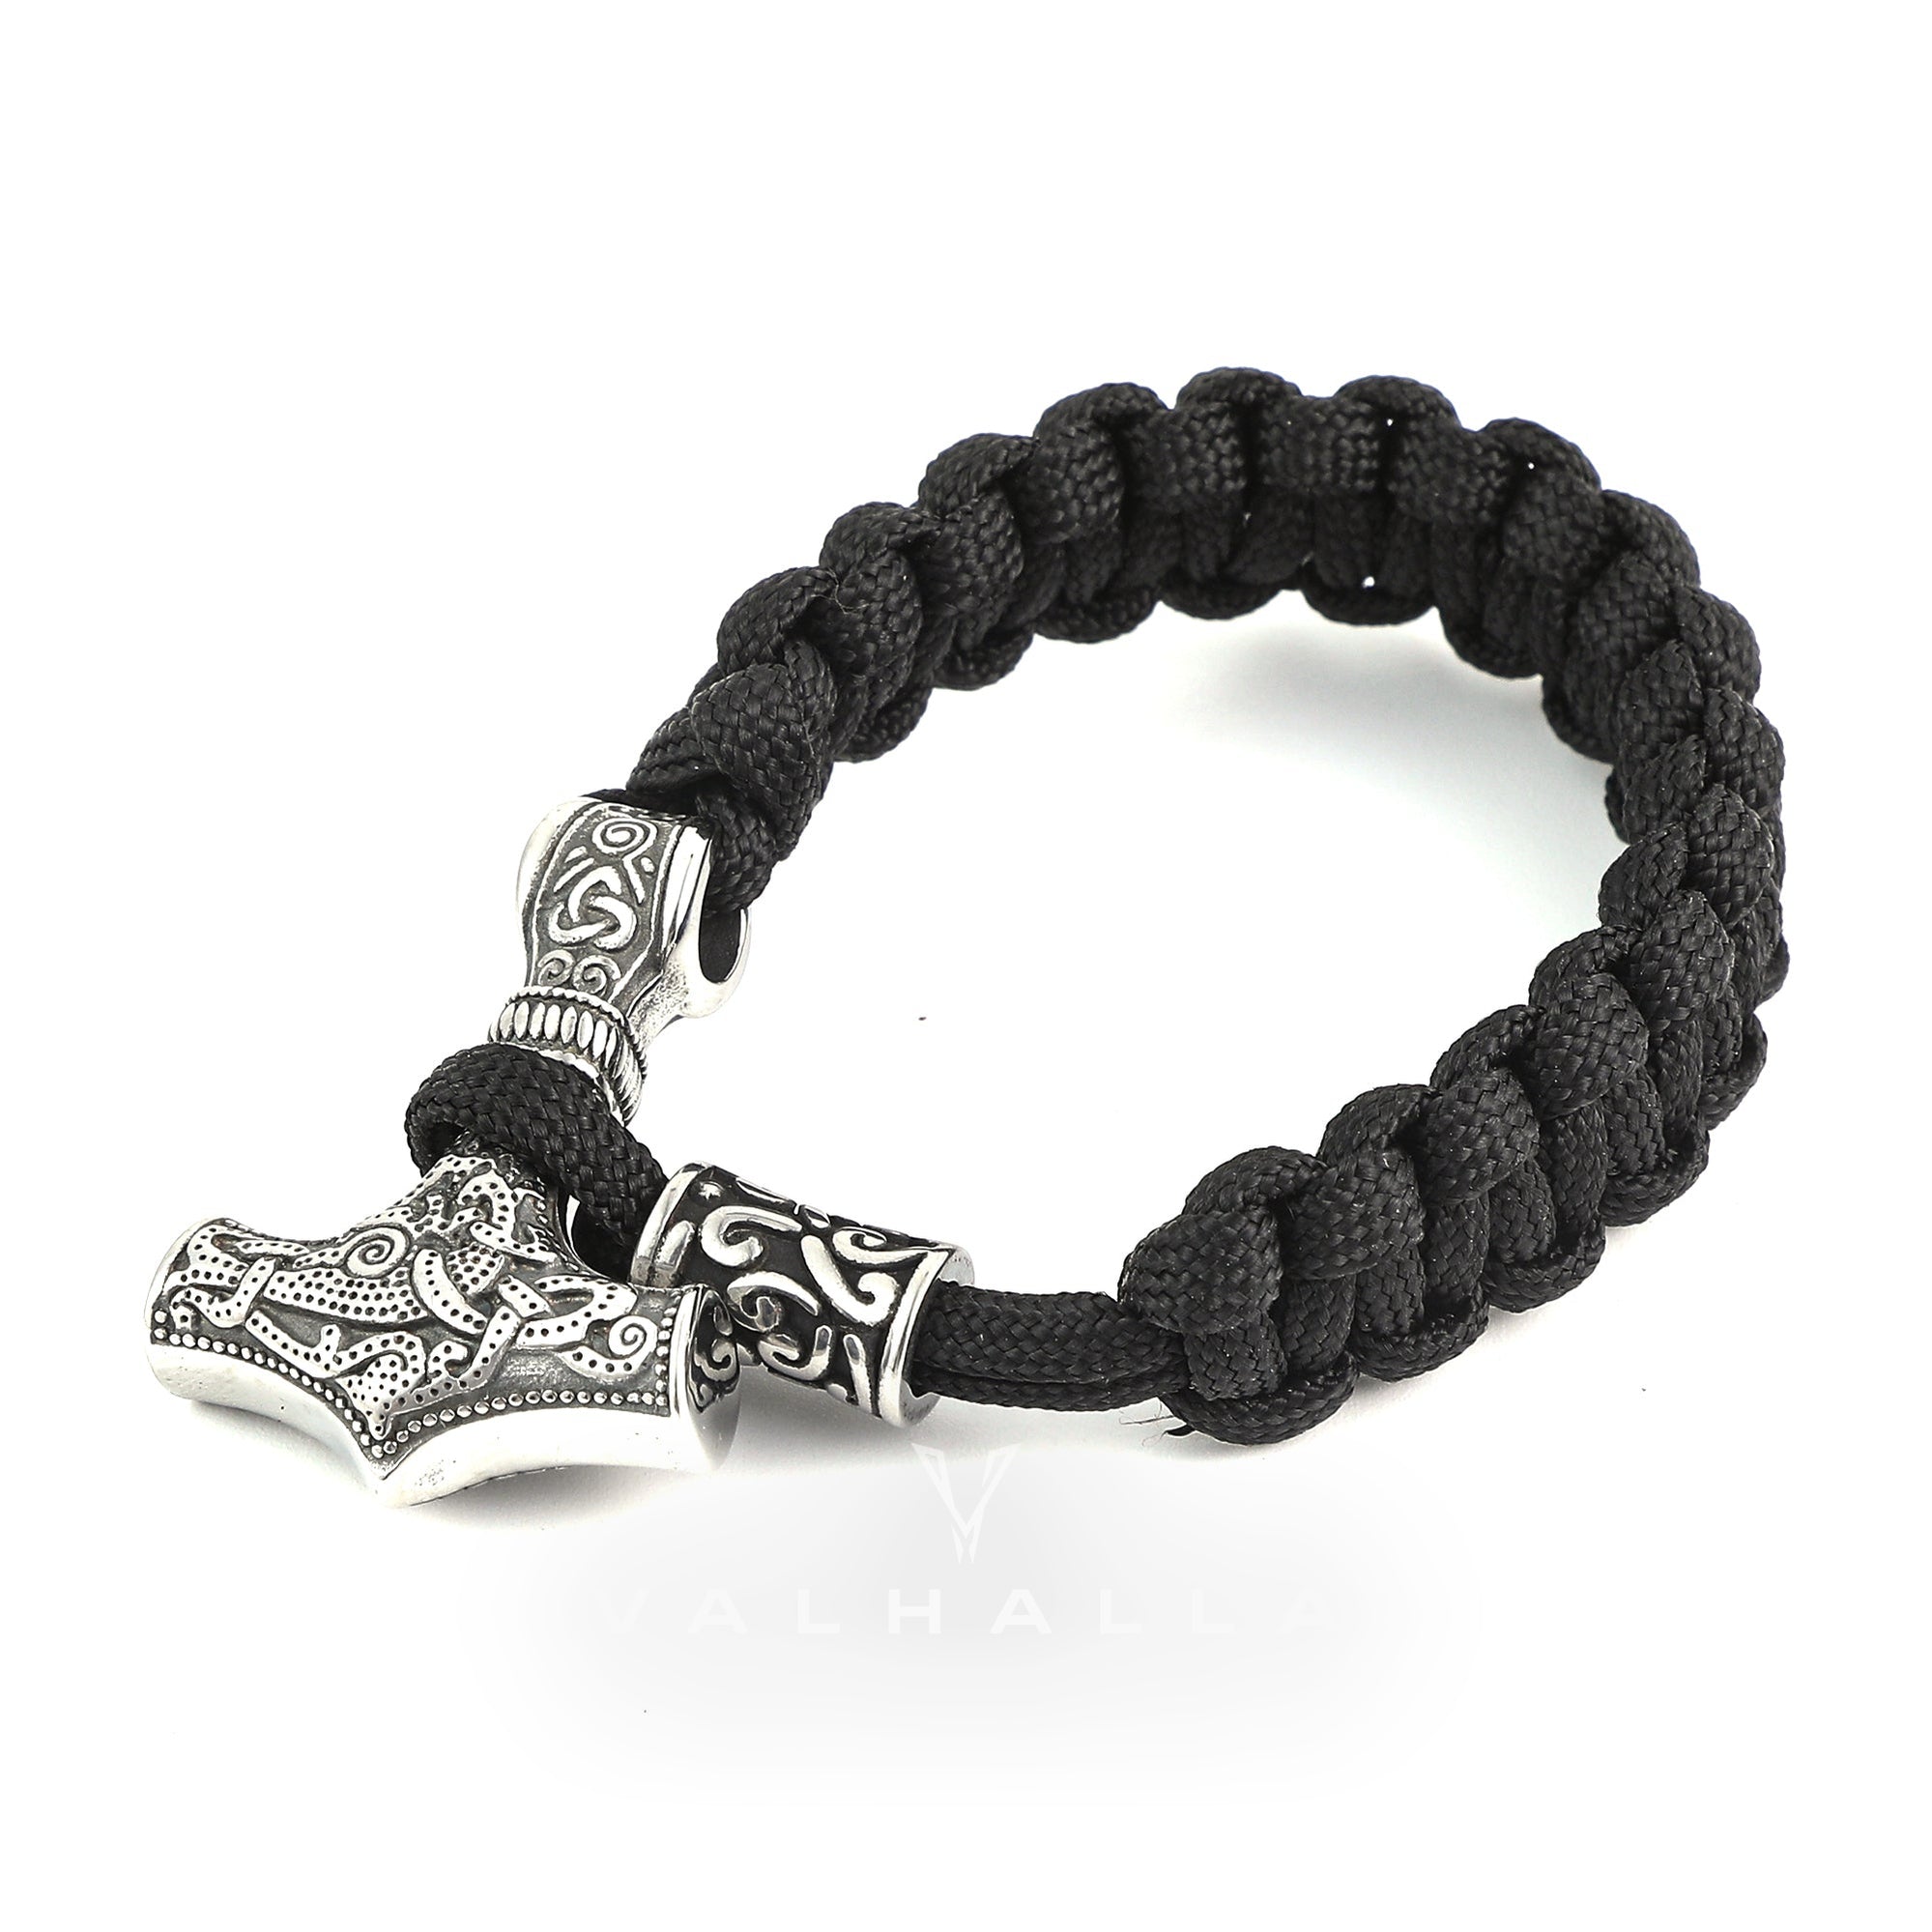 Handcrafted Stainless Steel Paracord and Mjolnir Bracelet